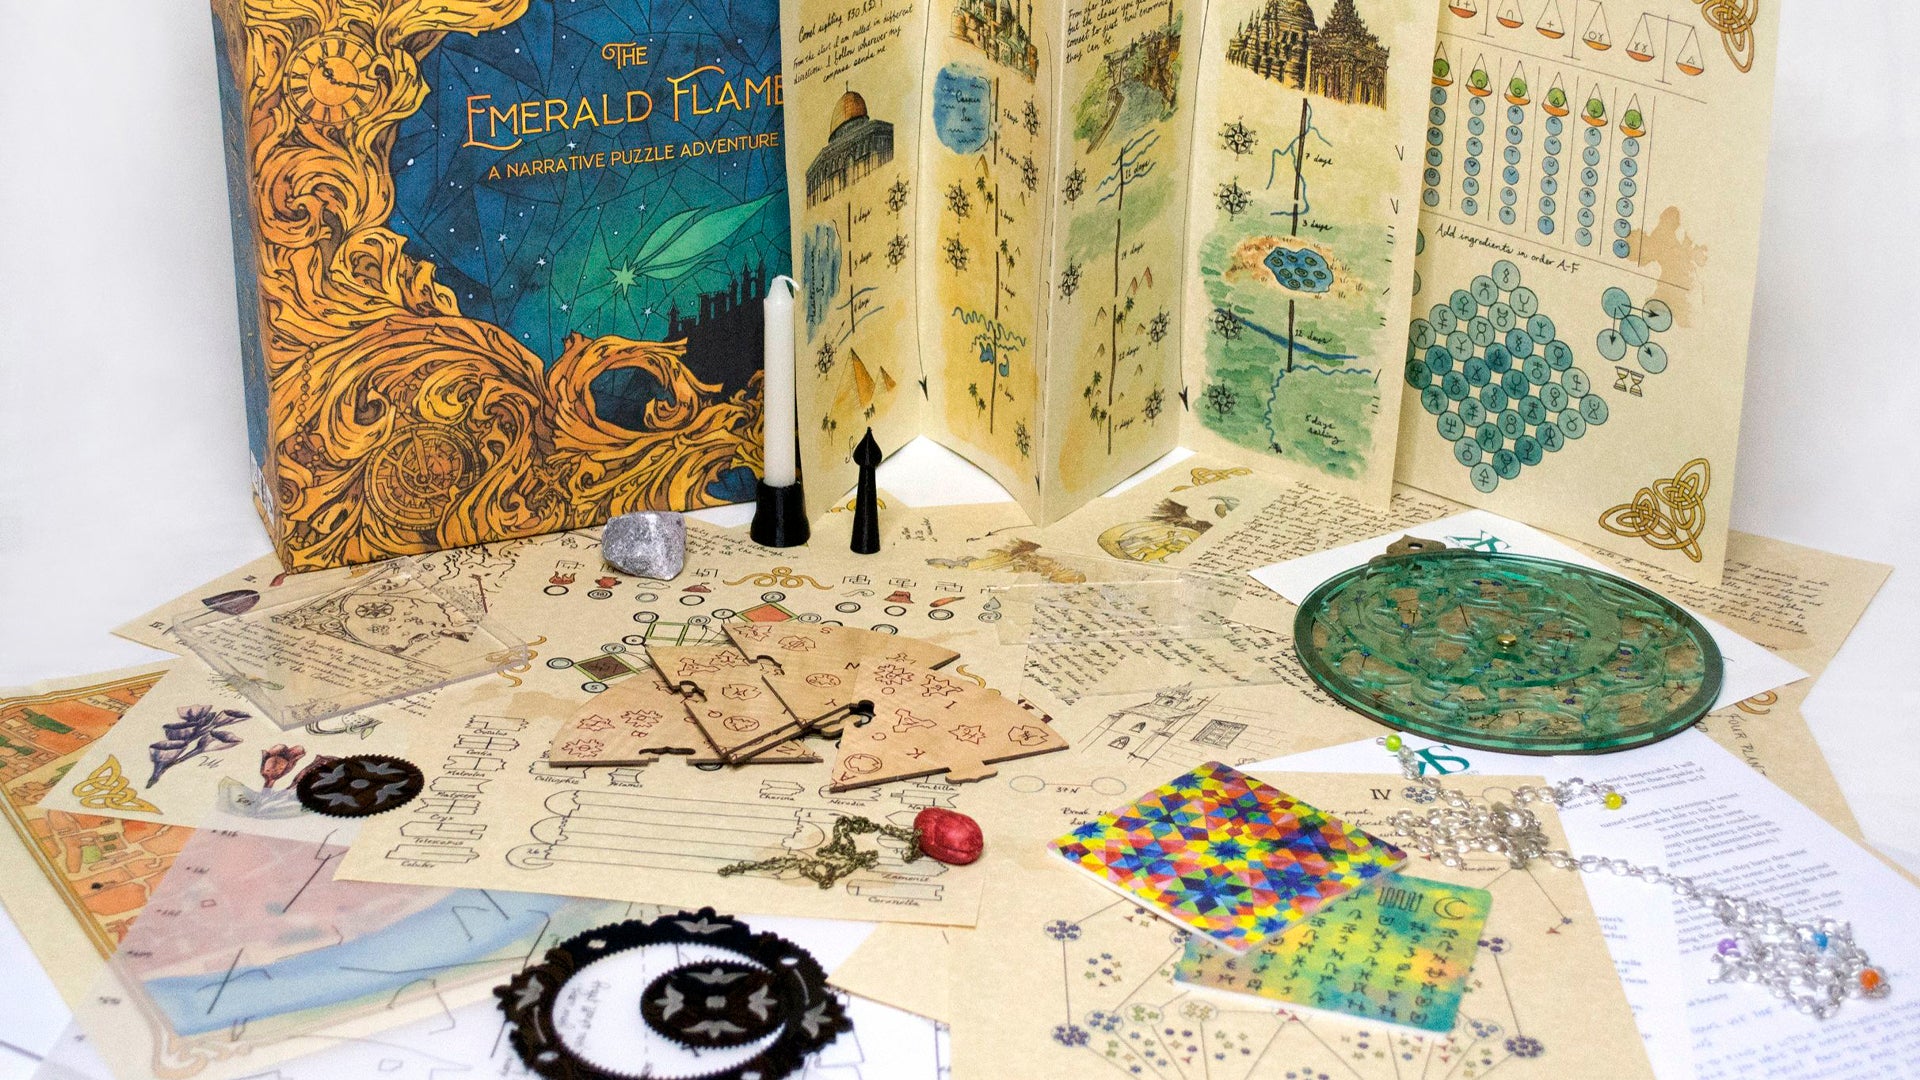 The Emerald Flame board game components